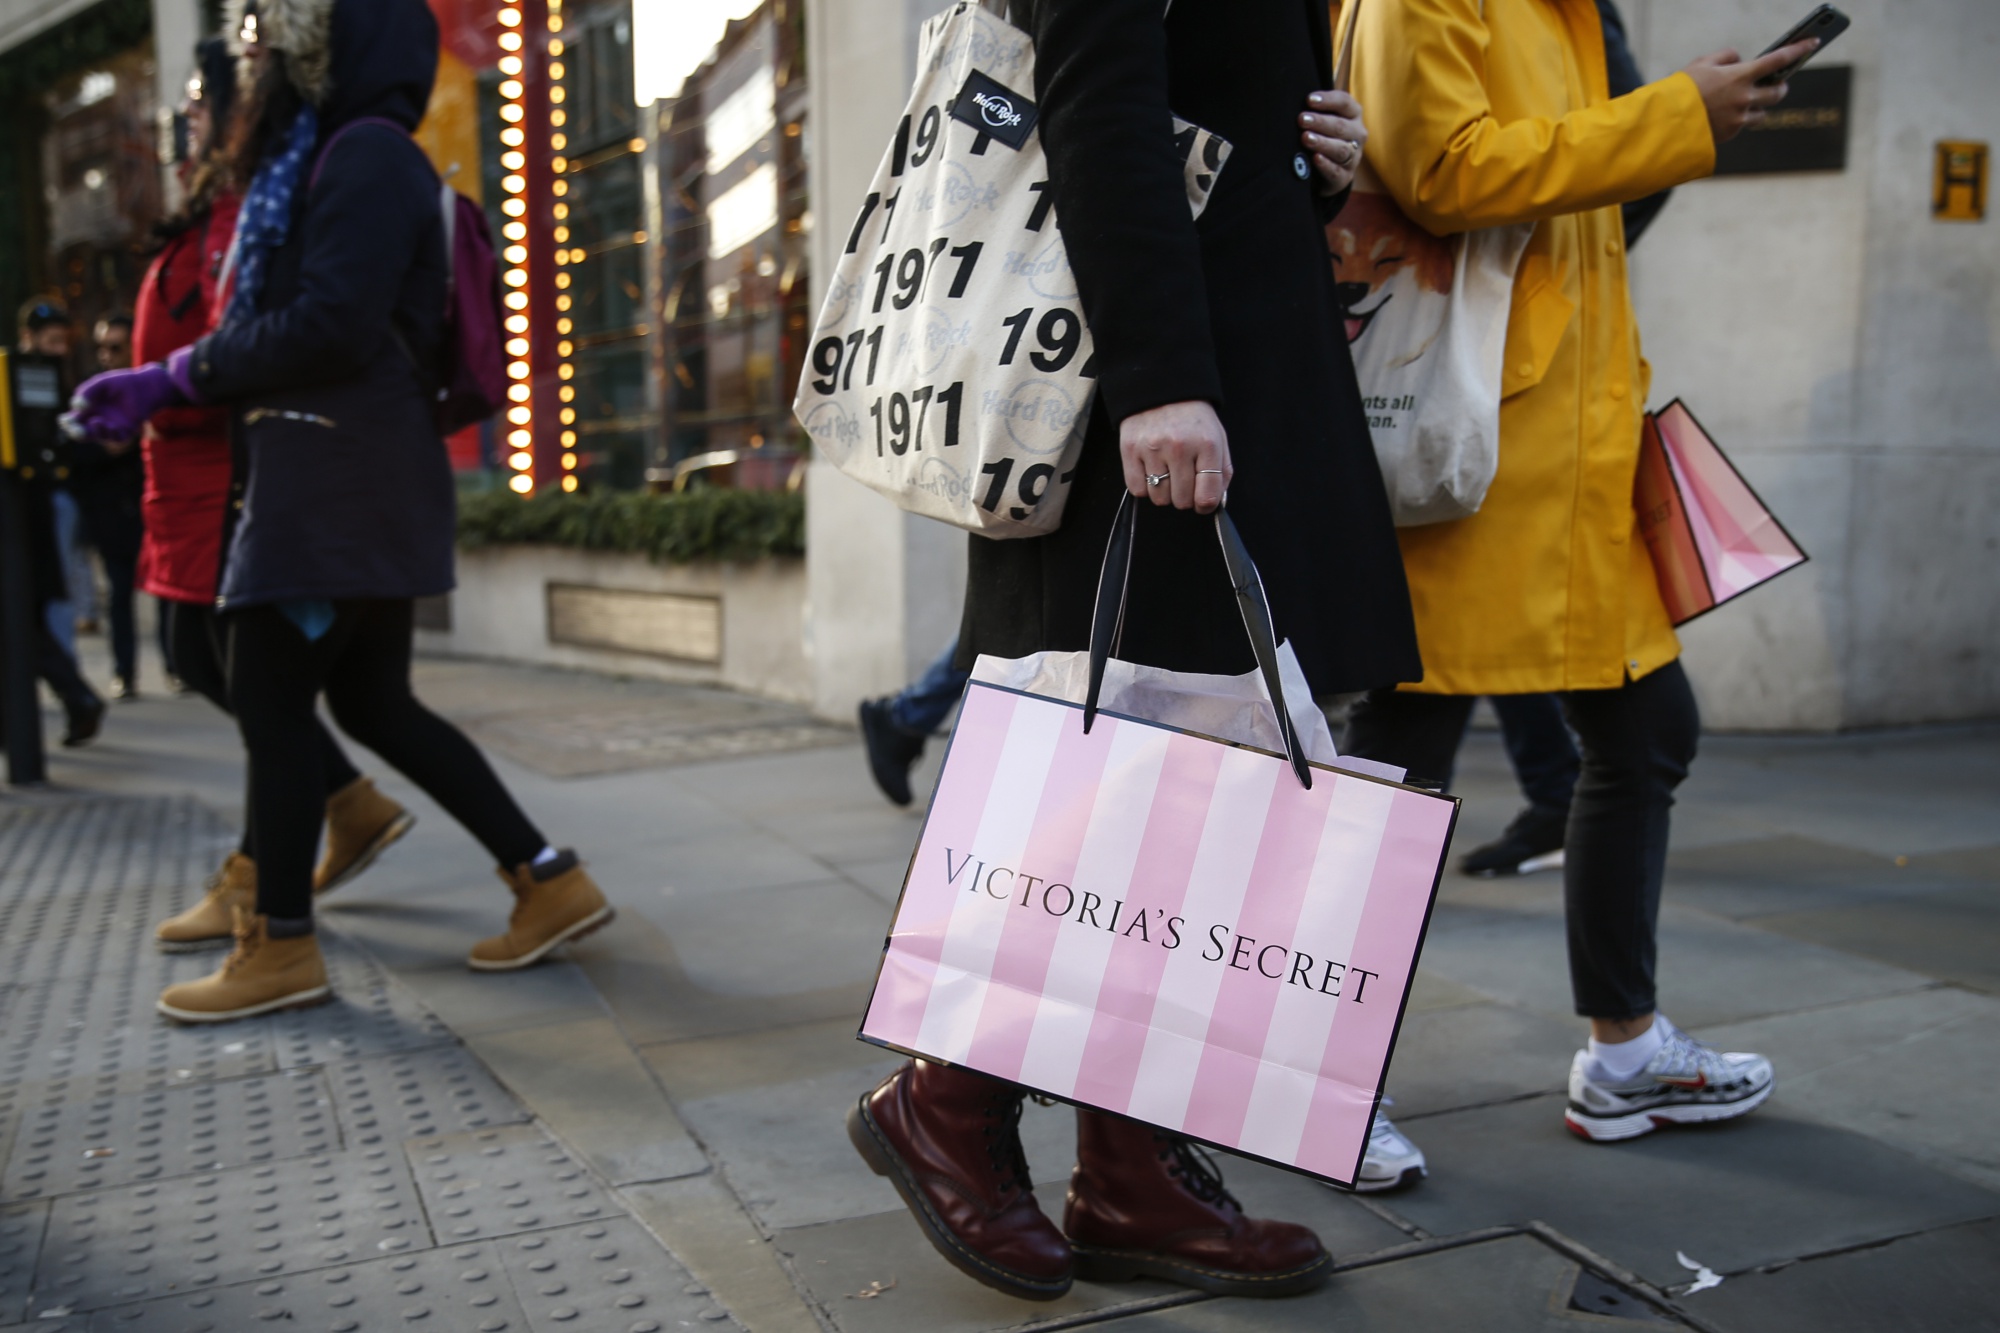 Clipped wings: Victoria's Secret sales slip as shoppers become